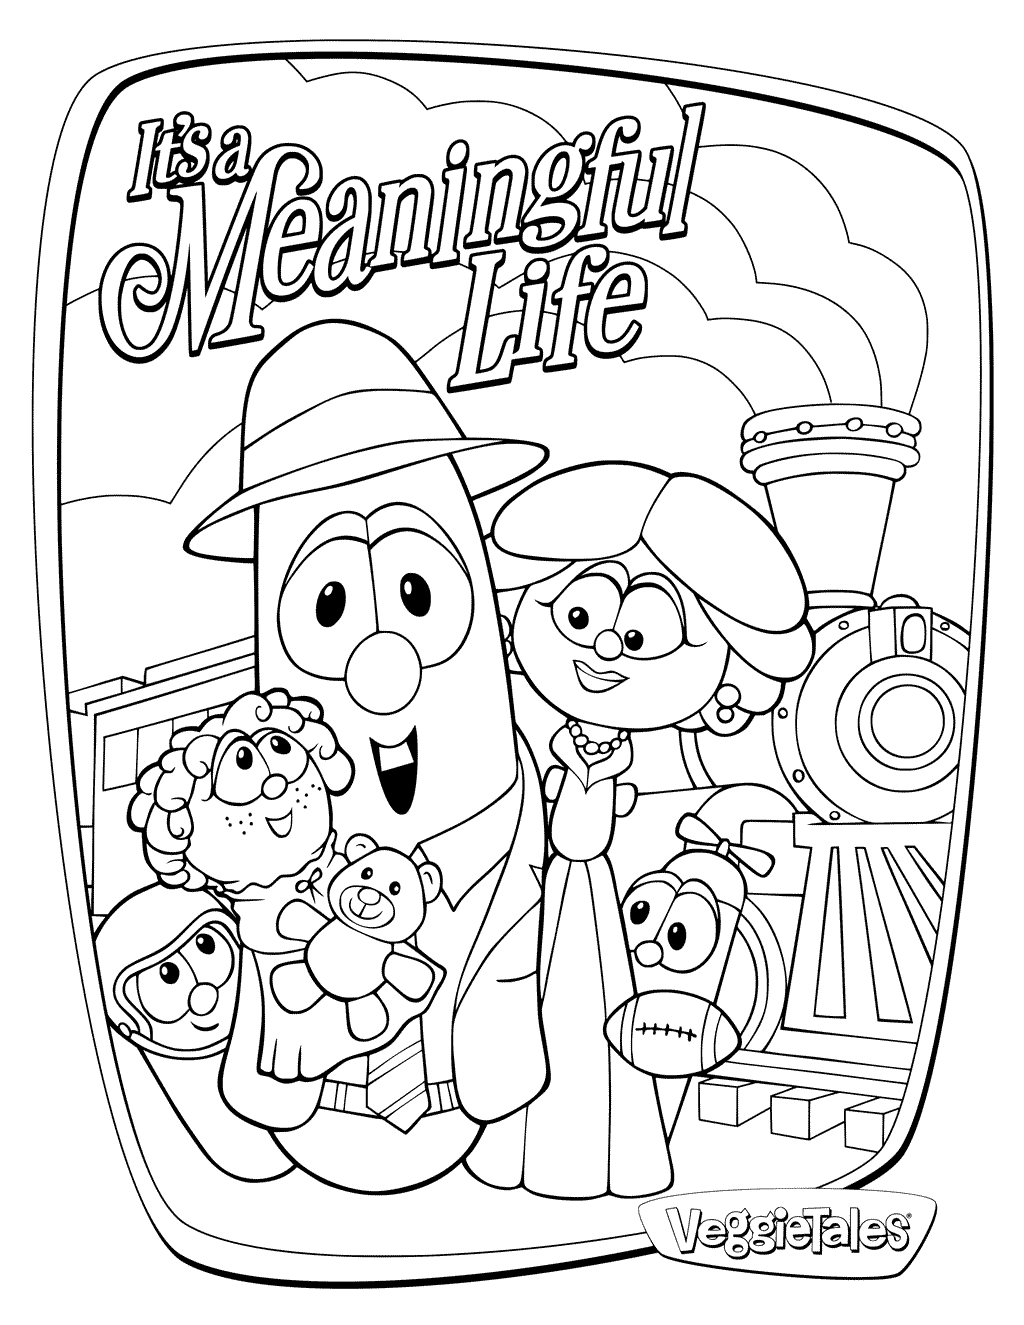 VeggieTales Meaningful Life Coloring Pages